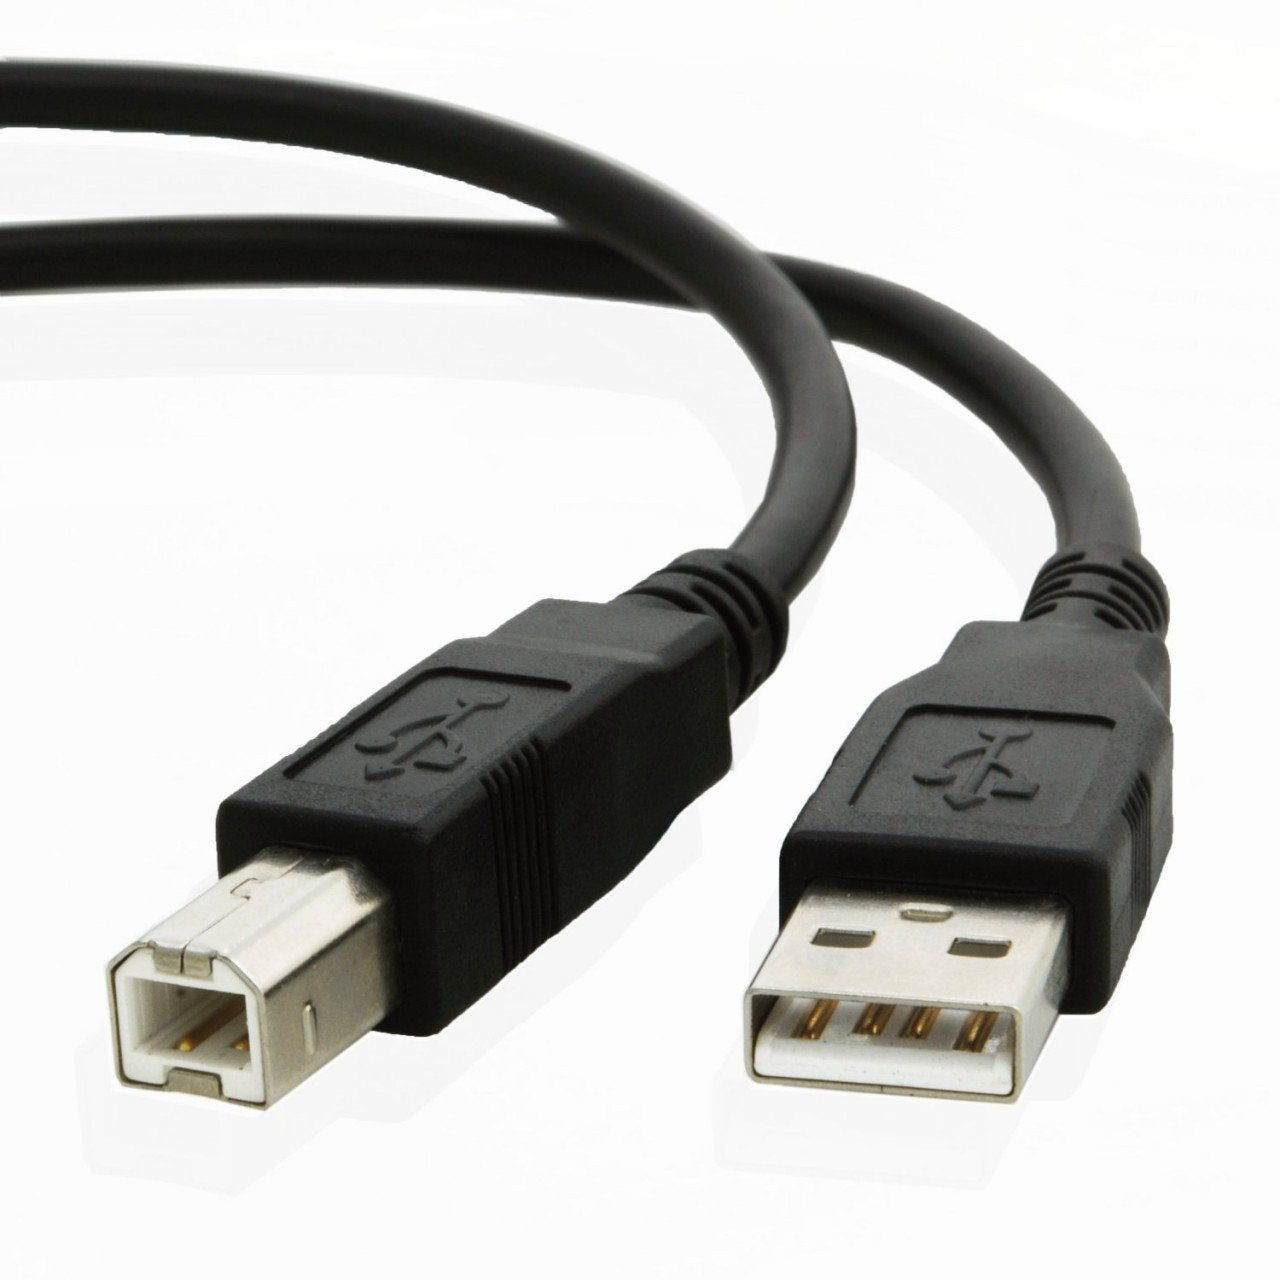 USB cable for Tascam AUDIO INTERFACE iXR